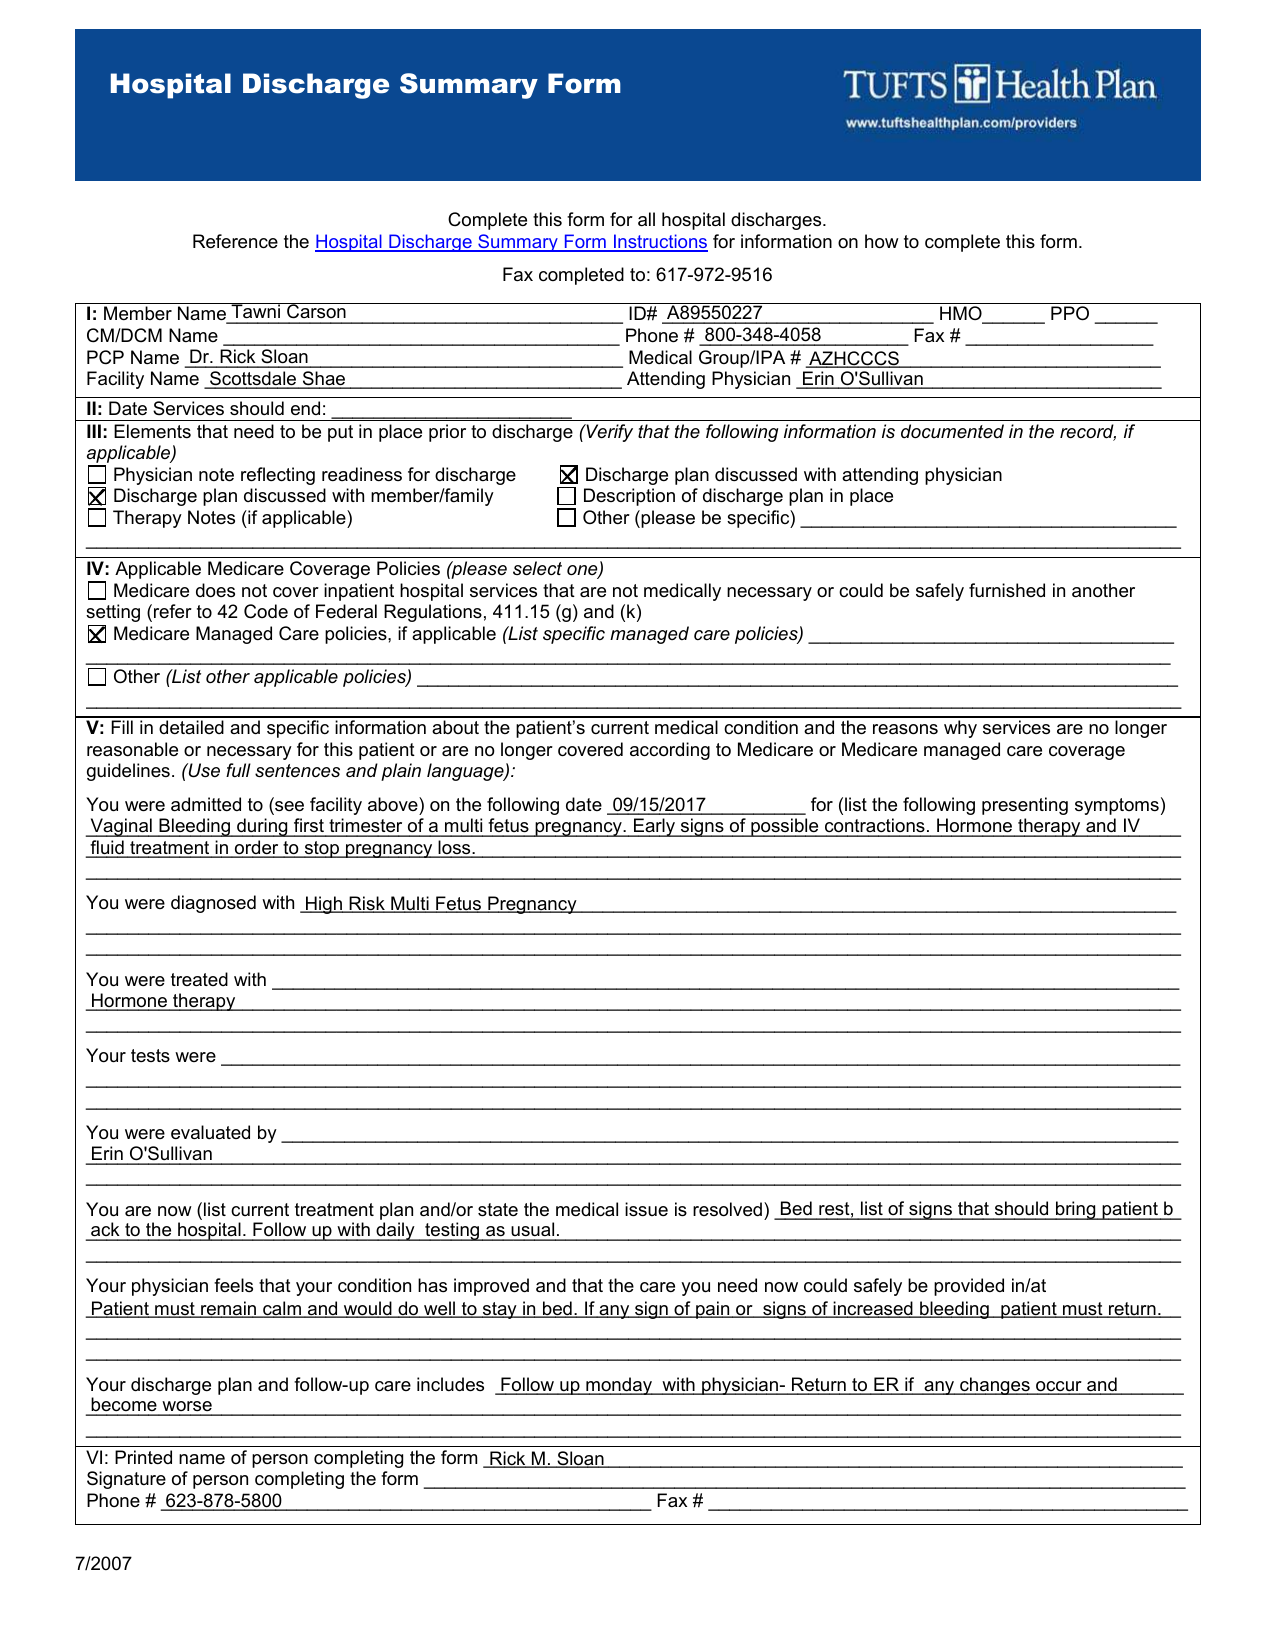 fake-hospital-papers-form-1